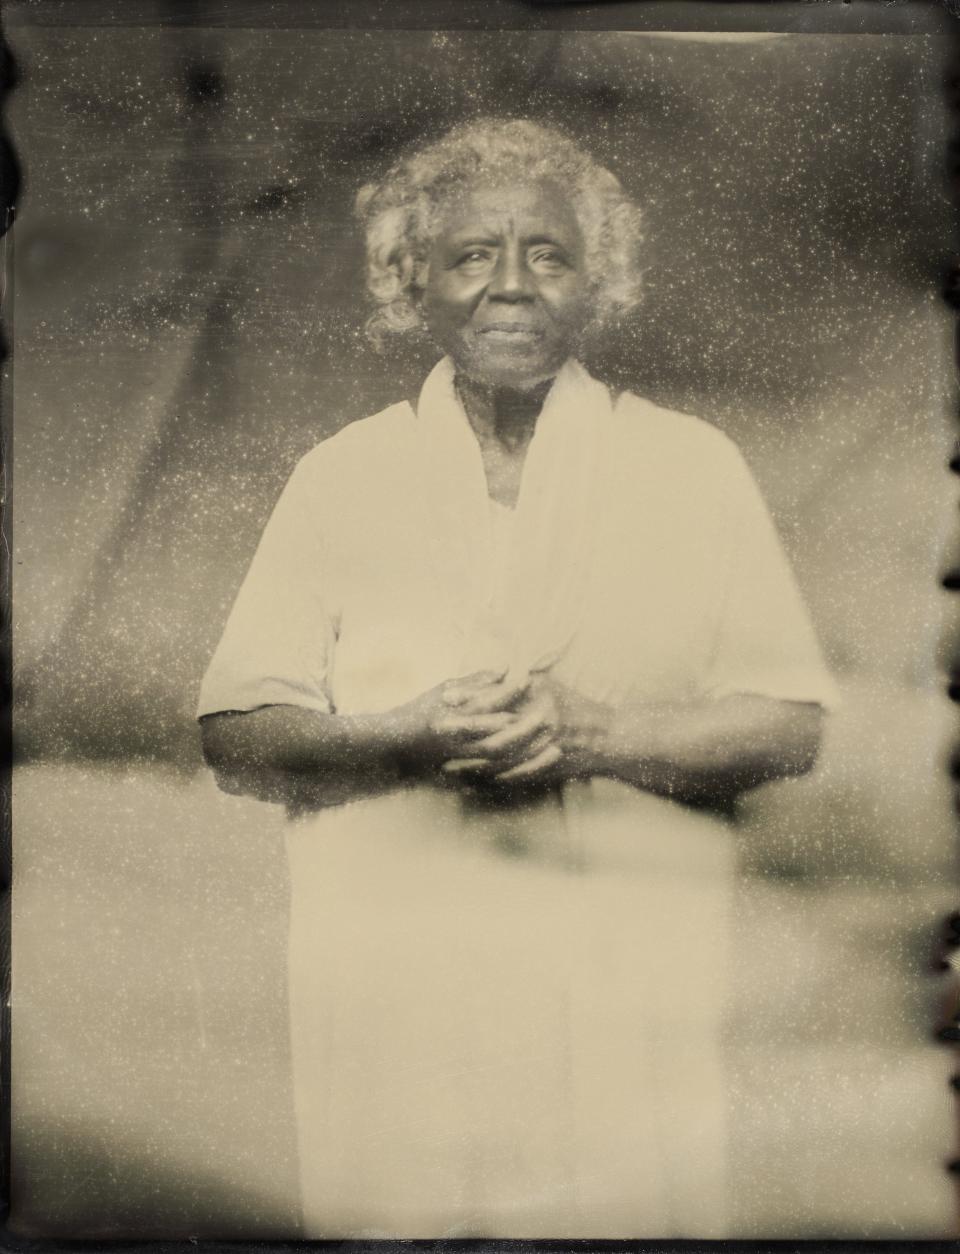 Peggy Mills Warner, great-great-great-great-great-great grandaughter of Betty Toler, a founding settler of Eagle Township in the Gist settlement, founded by formerly enslaved people from the Gist plantation in Virginia.